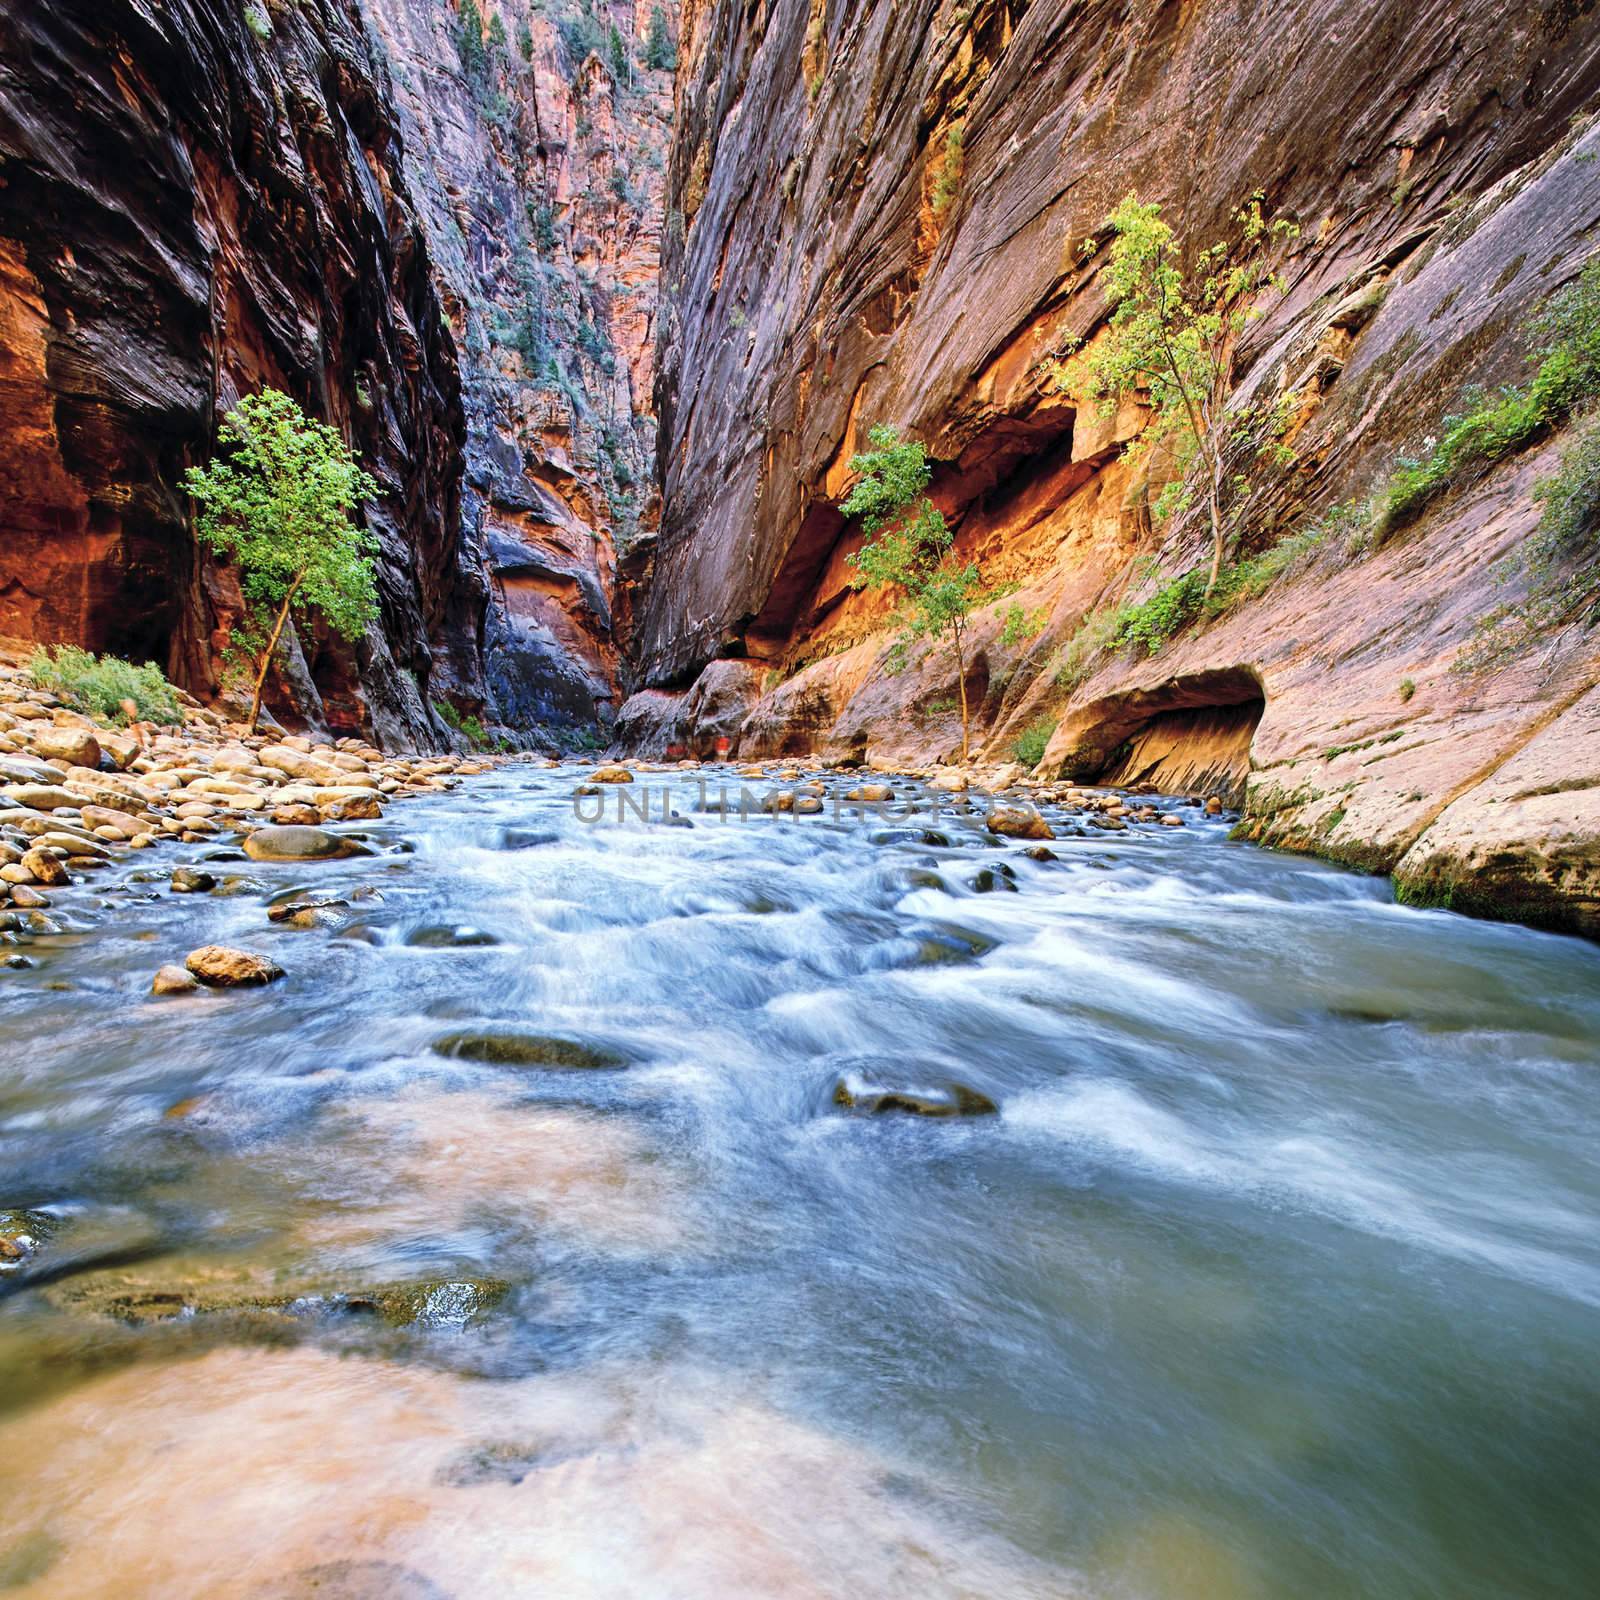 Shallow rapids of the Virgin River Narrows in Zion National Park - Utah 